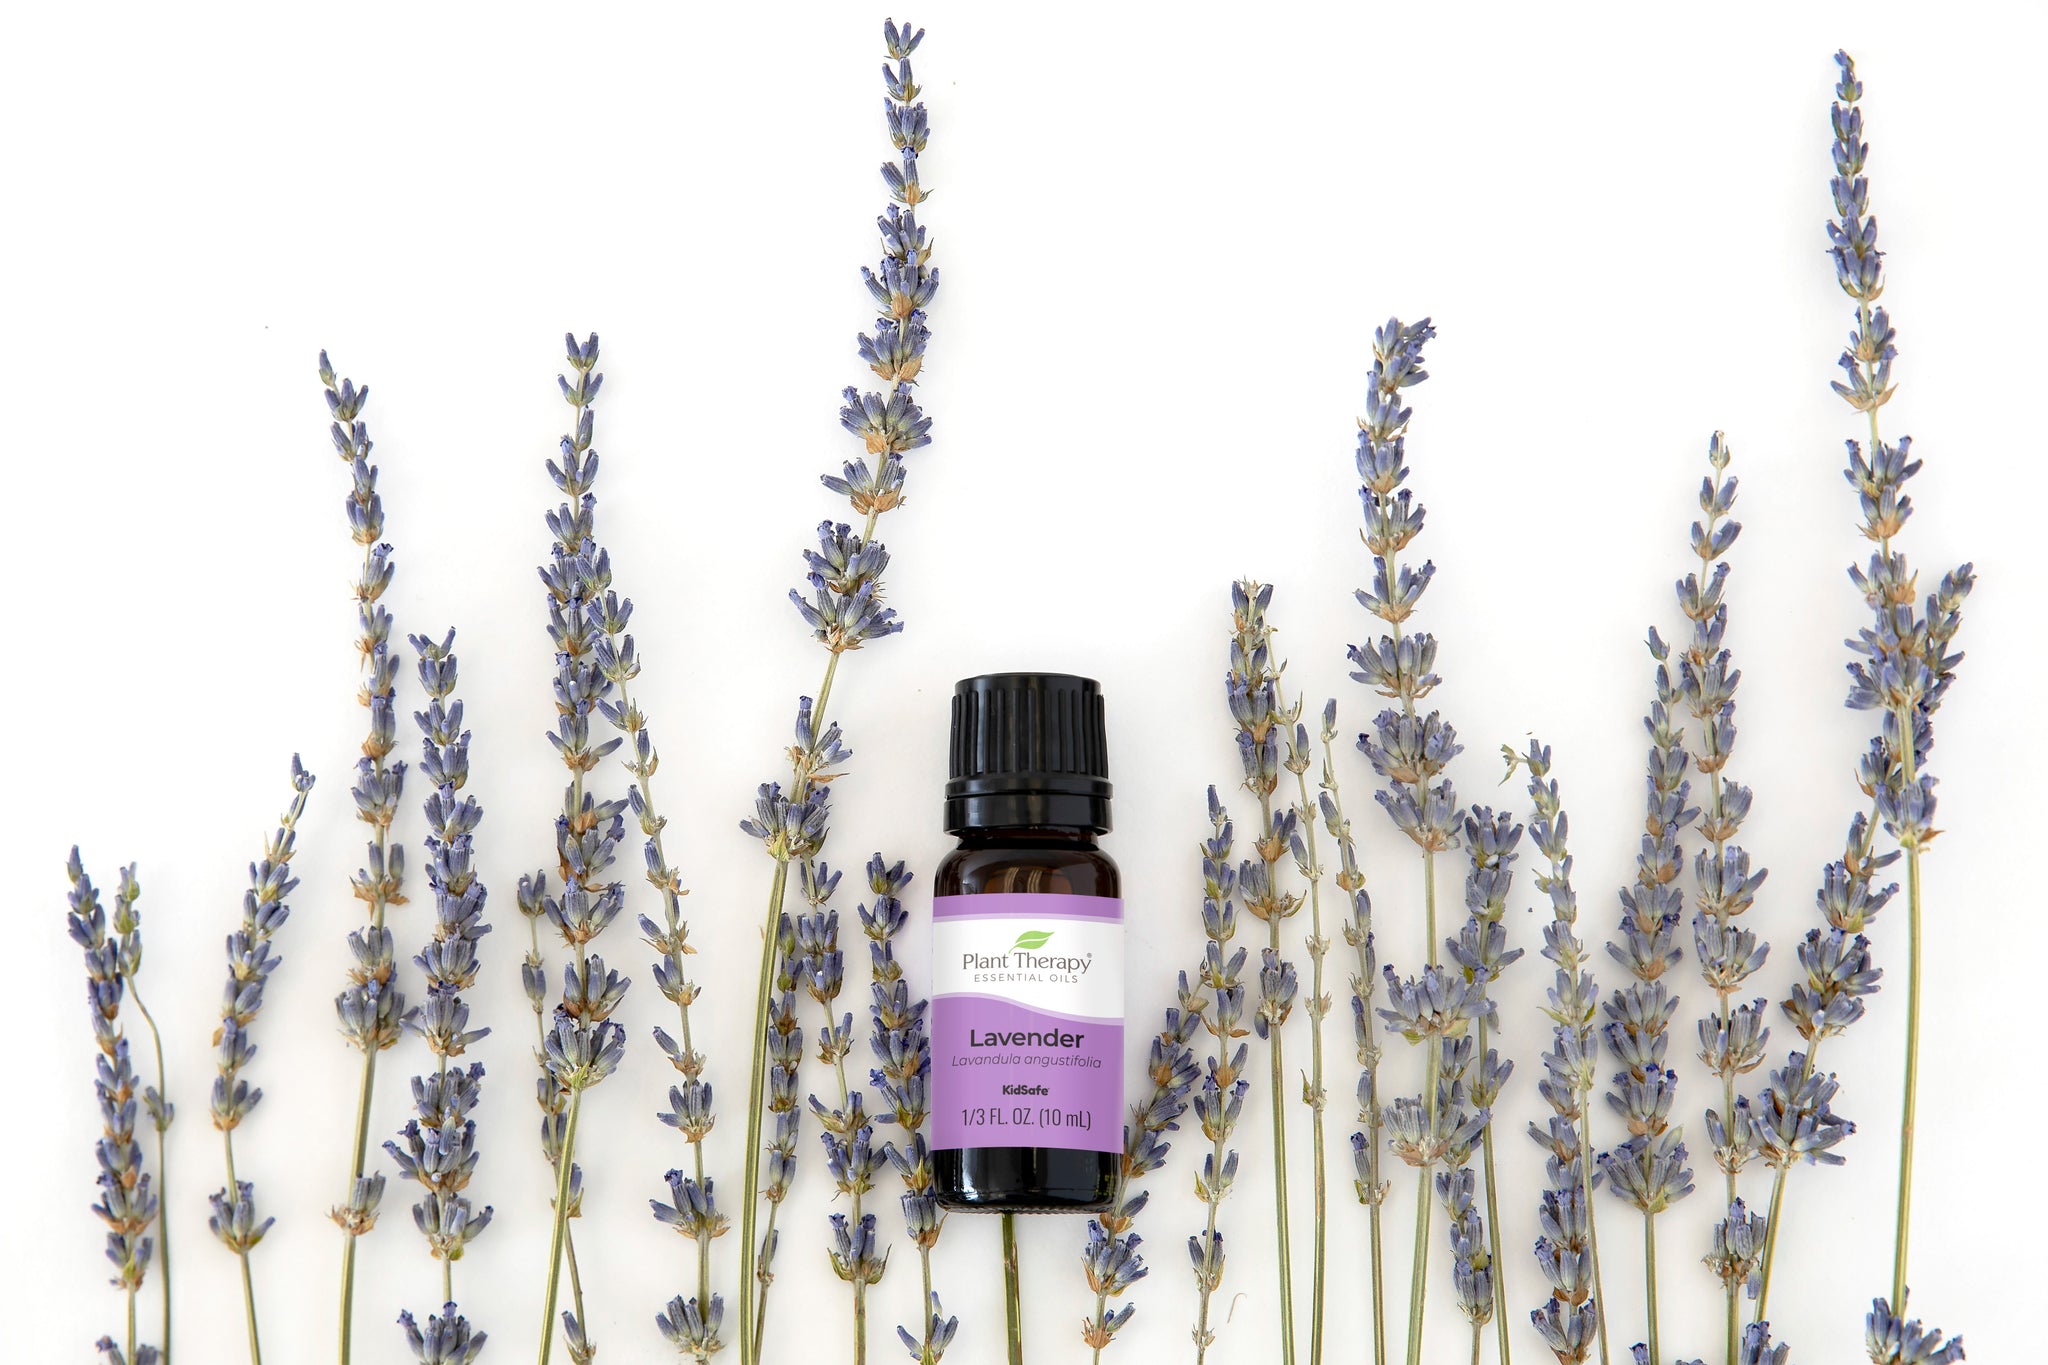 Lavender Essential Oil by Plant Therapy